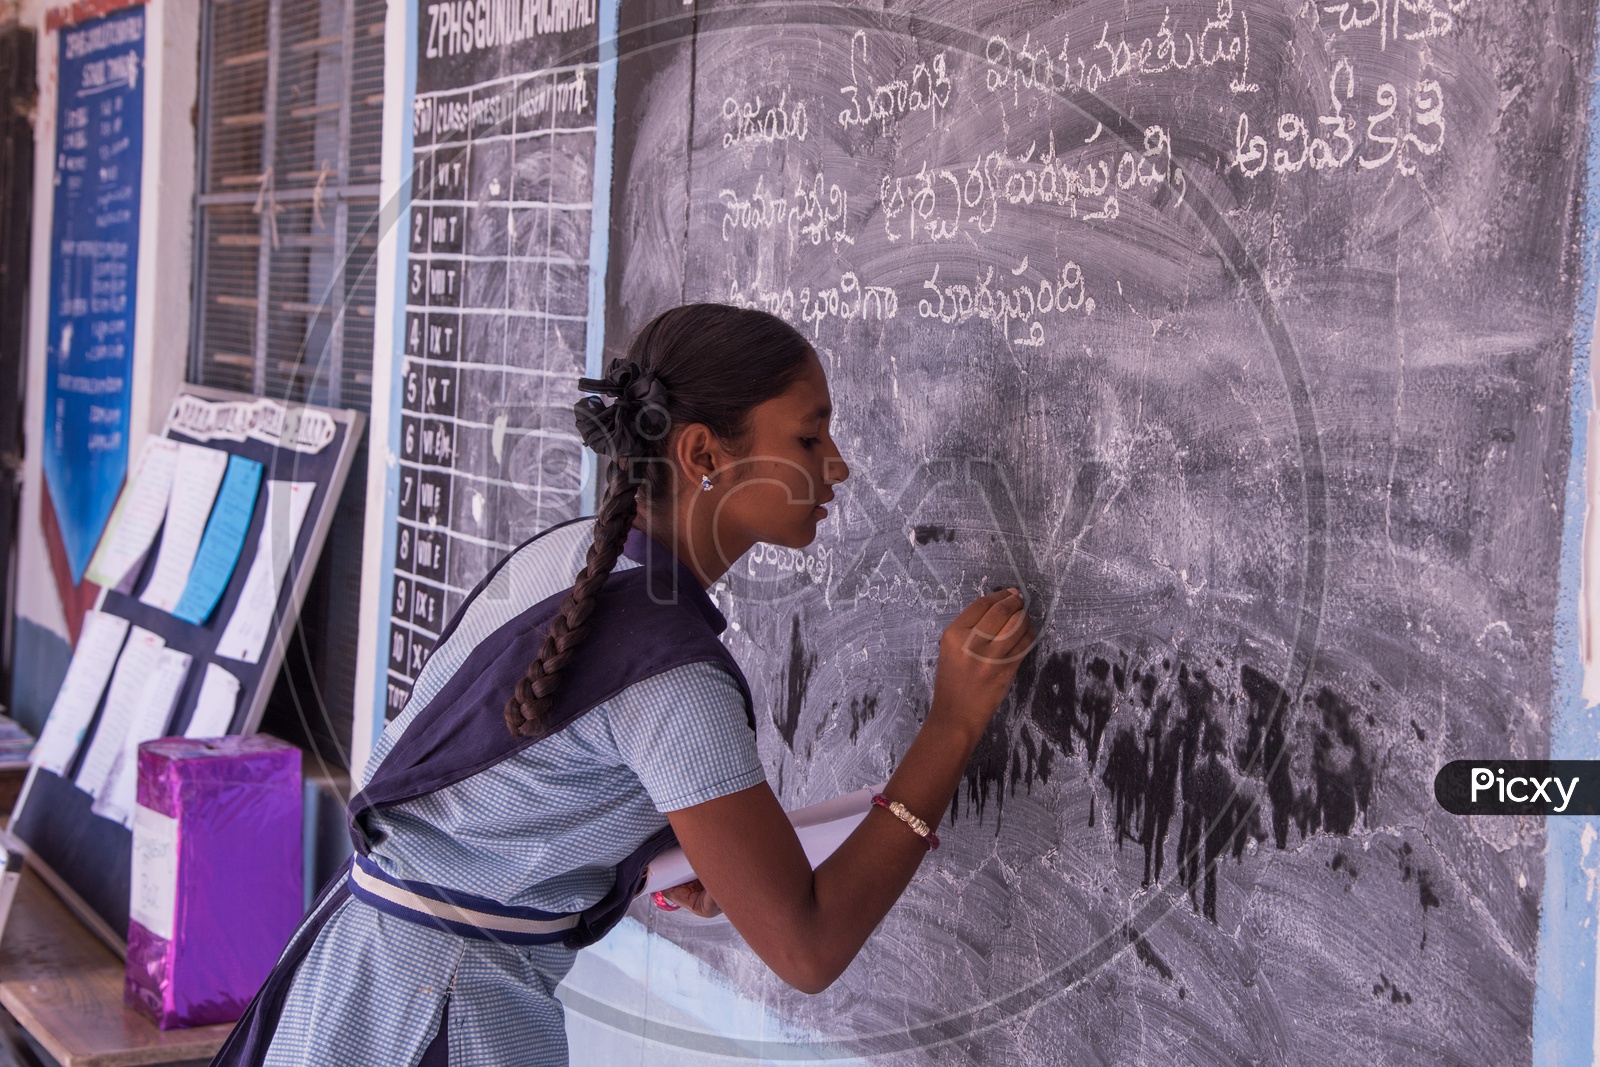 Student at Govt School writing on Black Board